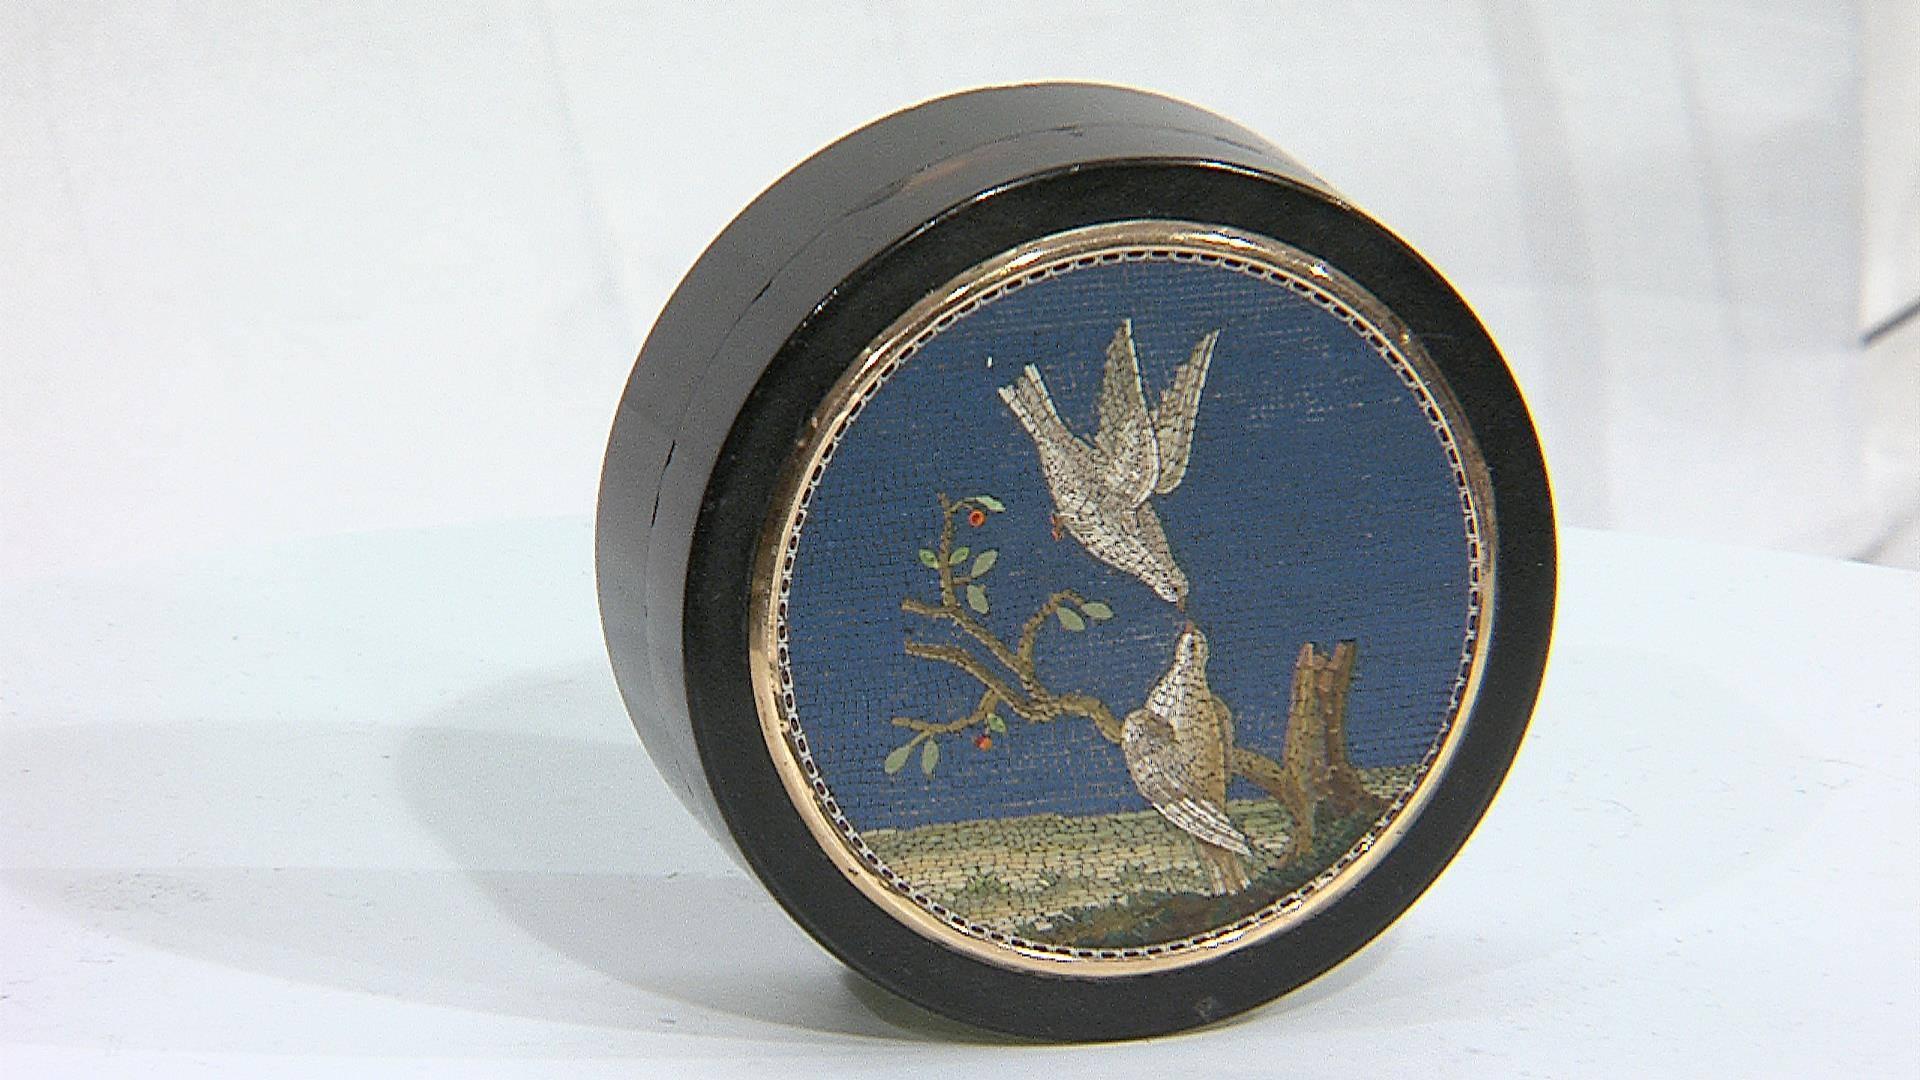 Tortoise shell pill box with gold ferrule. The lid features a micromosaic depicting two doves on an olive branch. Giacomo Raffaelli (1753-1836), Rome, late 18th century.